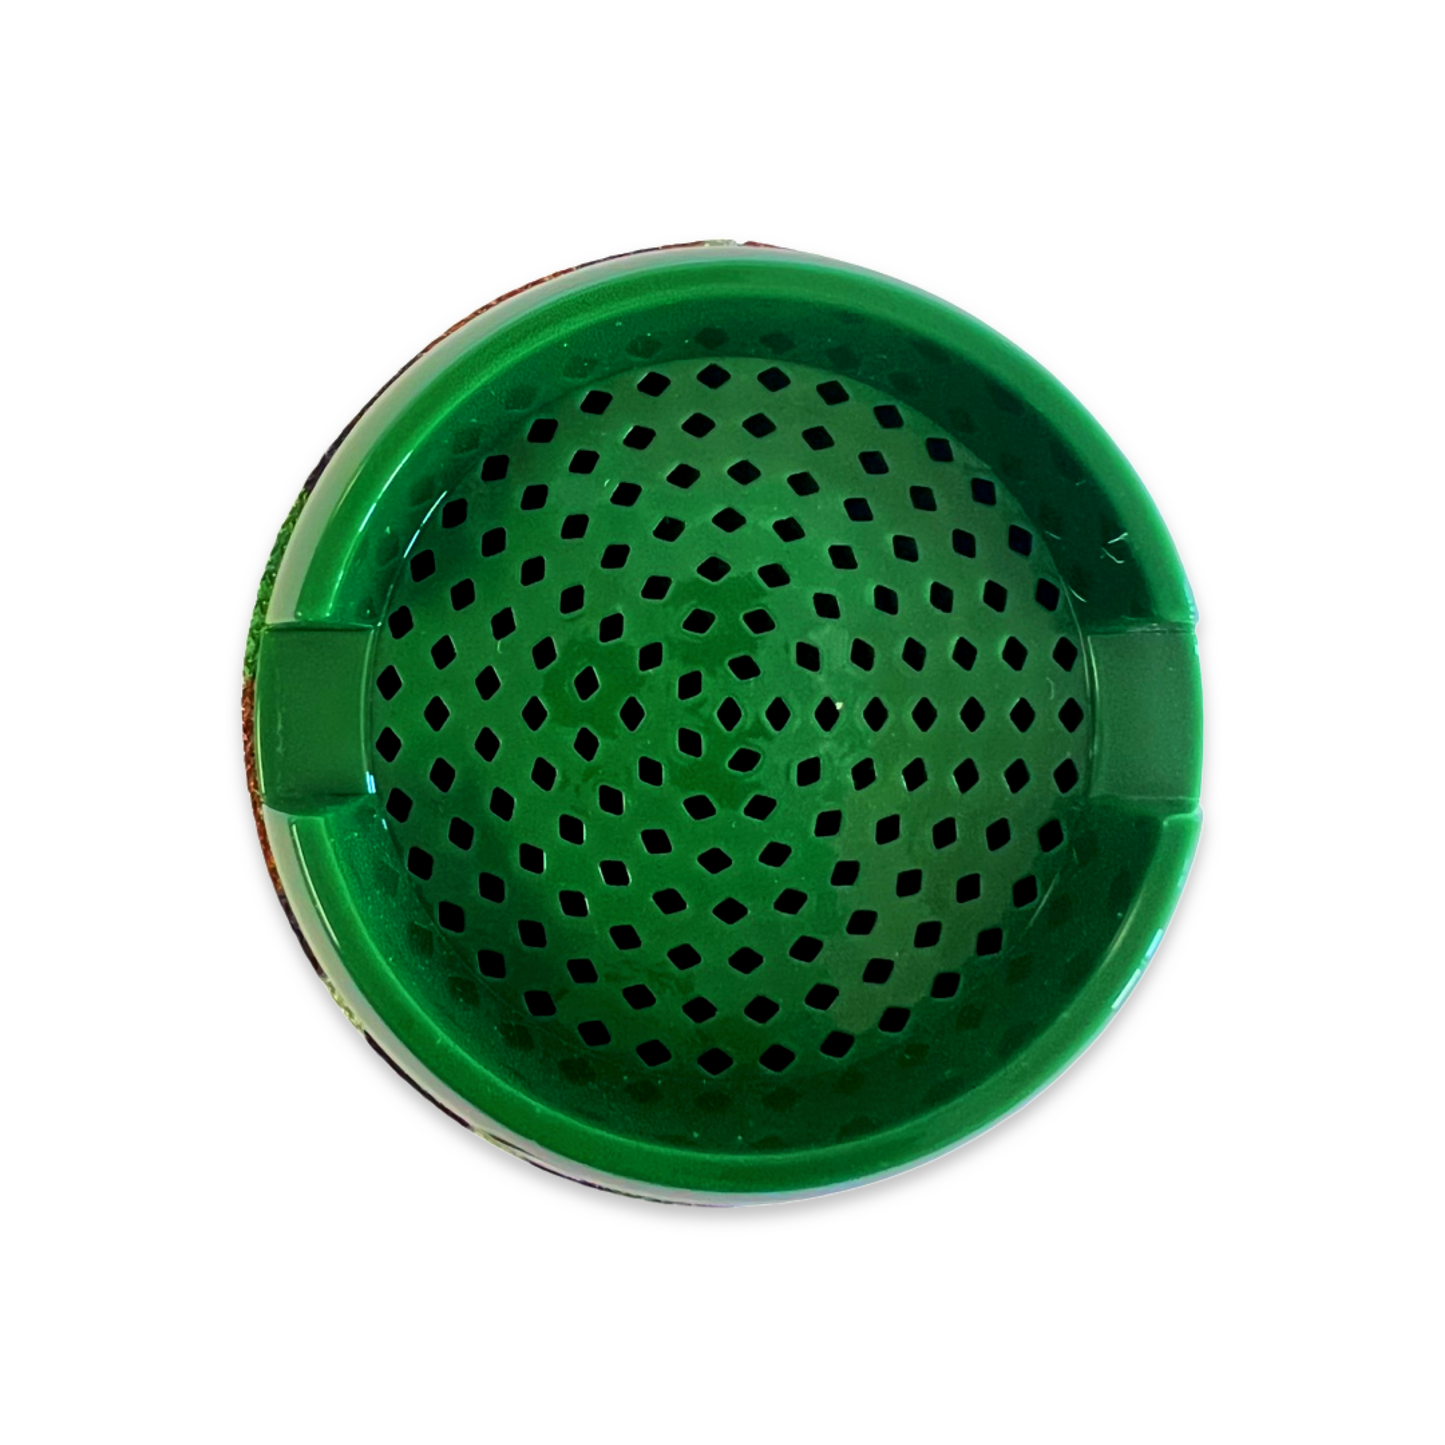 Army Green Portable Bluetooth Speaker with Handsfree Calling Mic, Waterproof, and FM Radio Capability